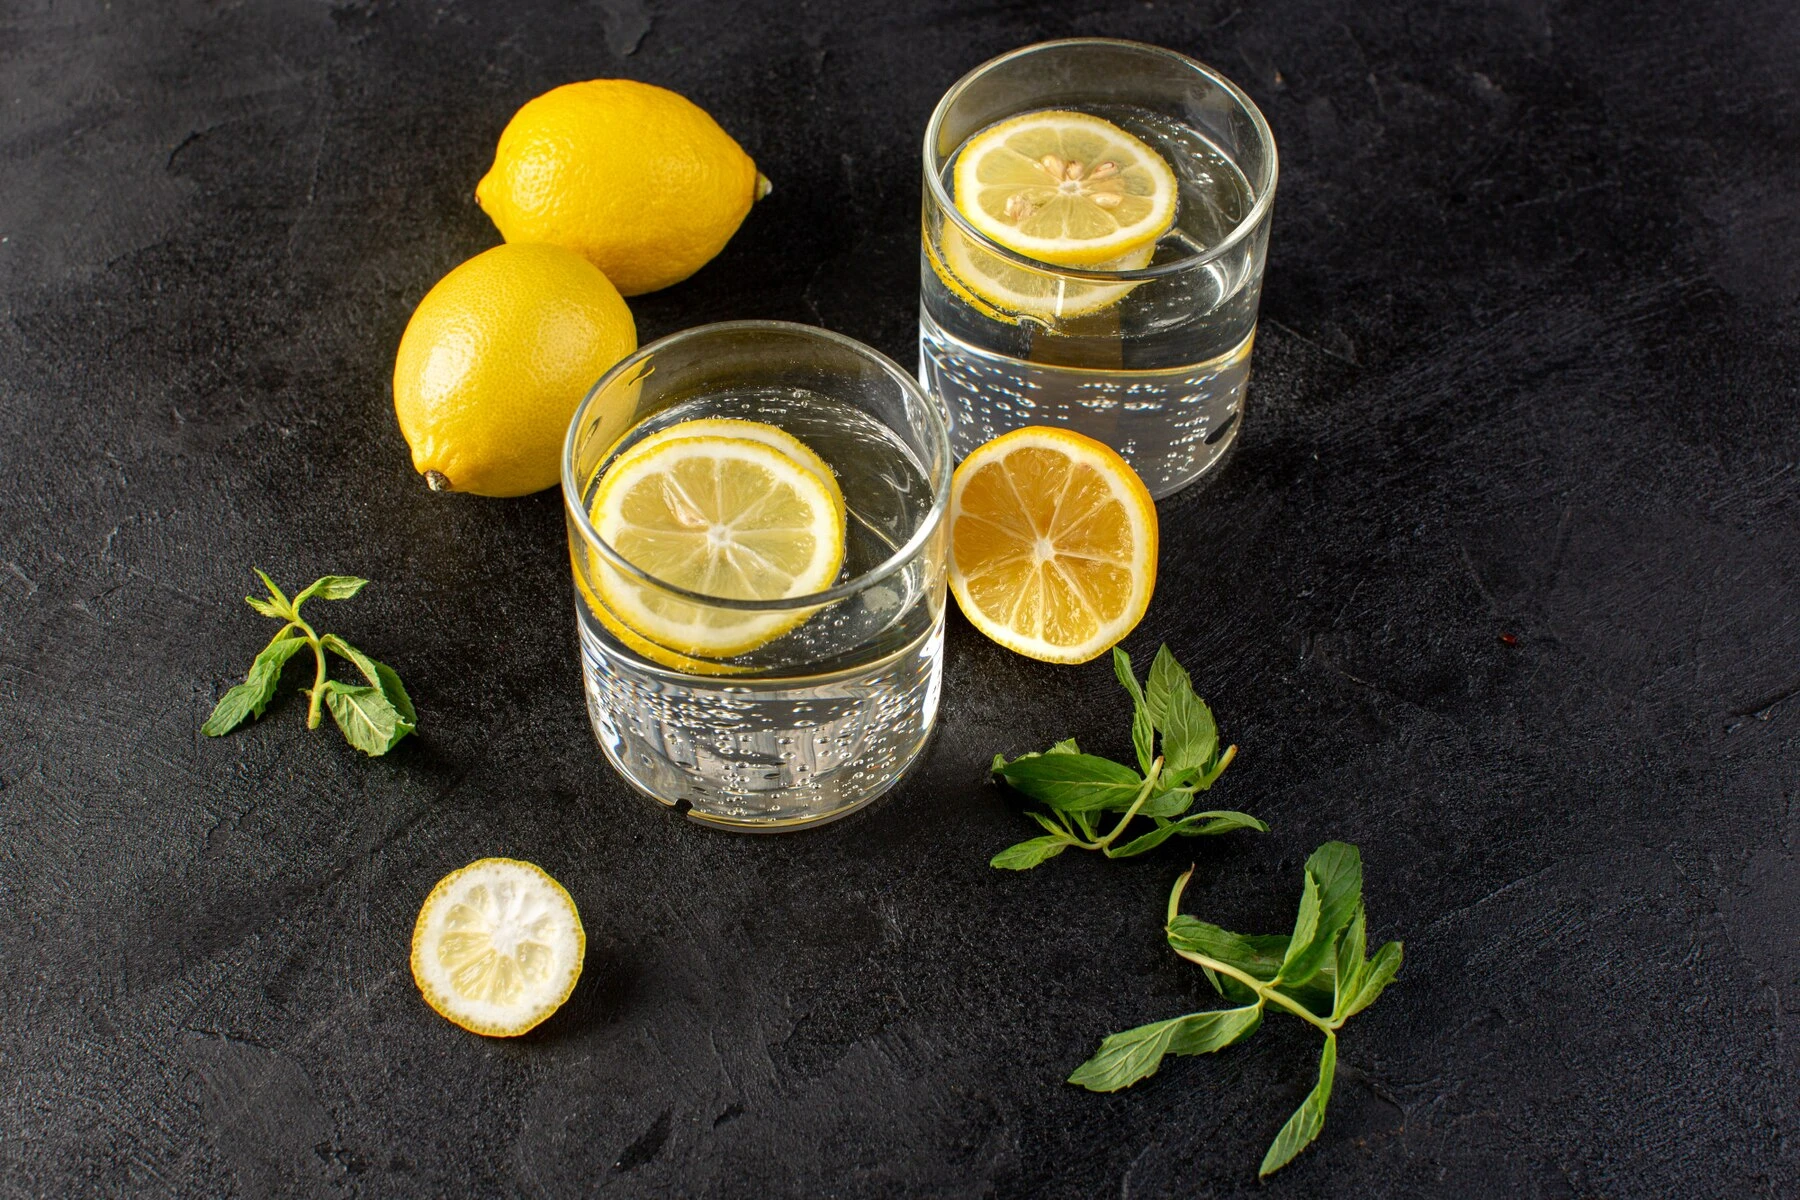 a-front-view-water-with-lemon-fresh-cool-drink-with-sliced-lemons-along-with-whole-lemons-and-leaves-inside-transparent-glasses-on-the-dark_140725-18360.jpg